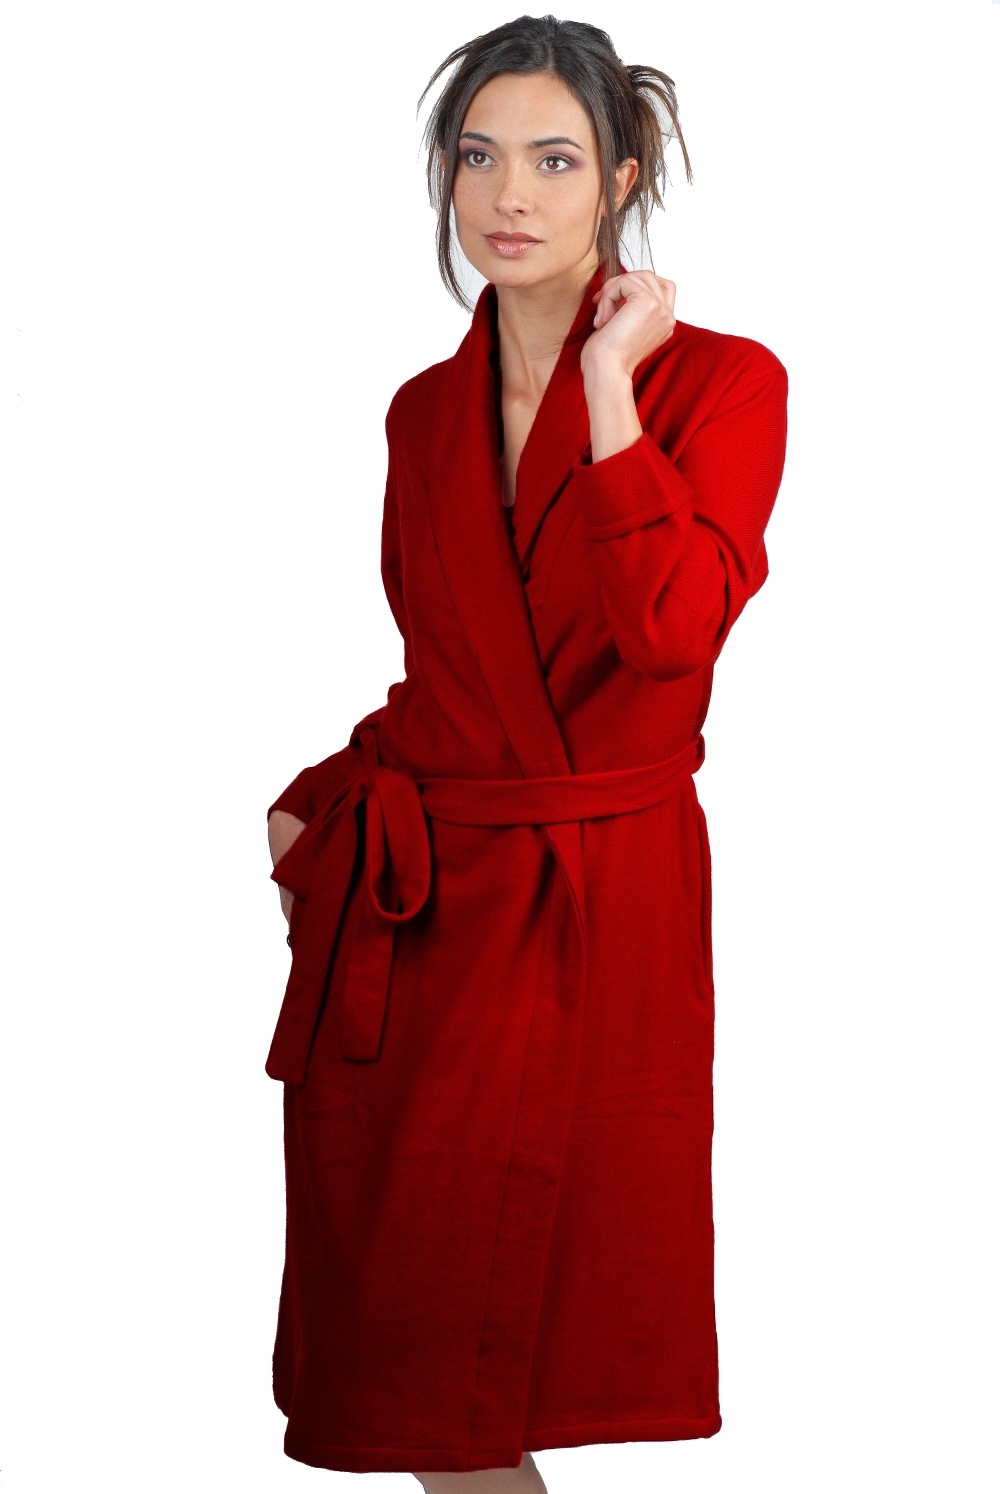 Cashmere accessori cocooning mylady rosso intenso t2